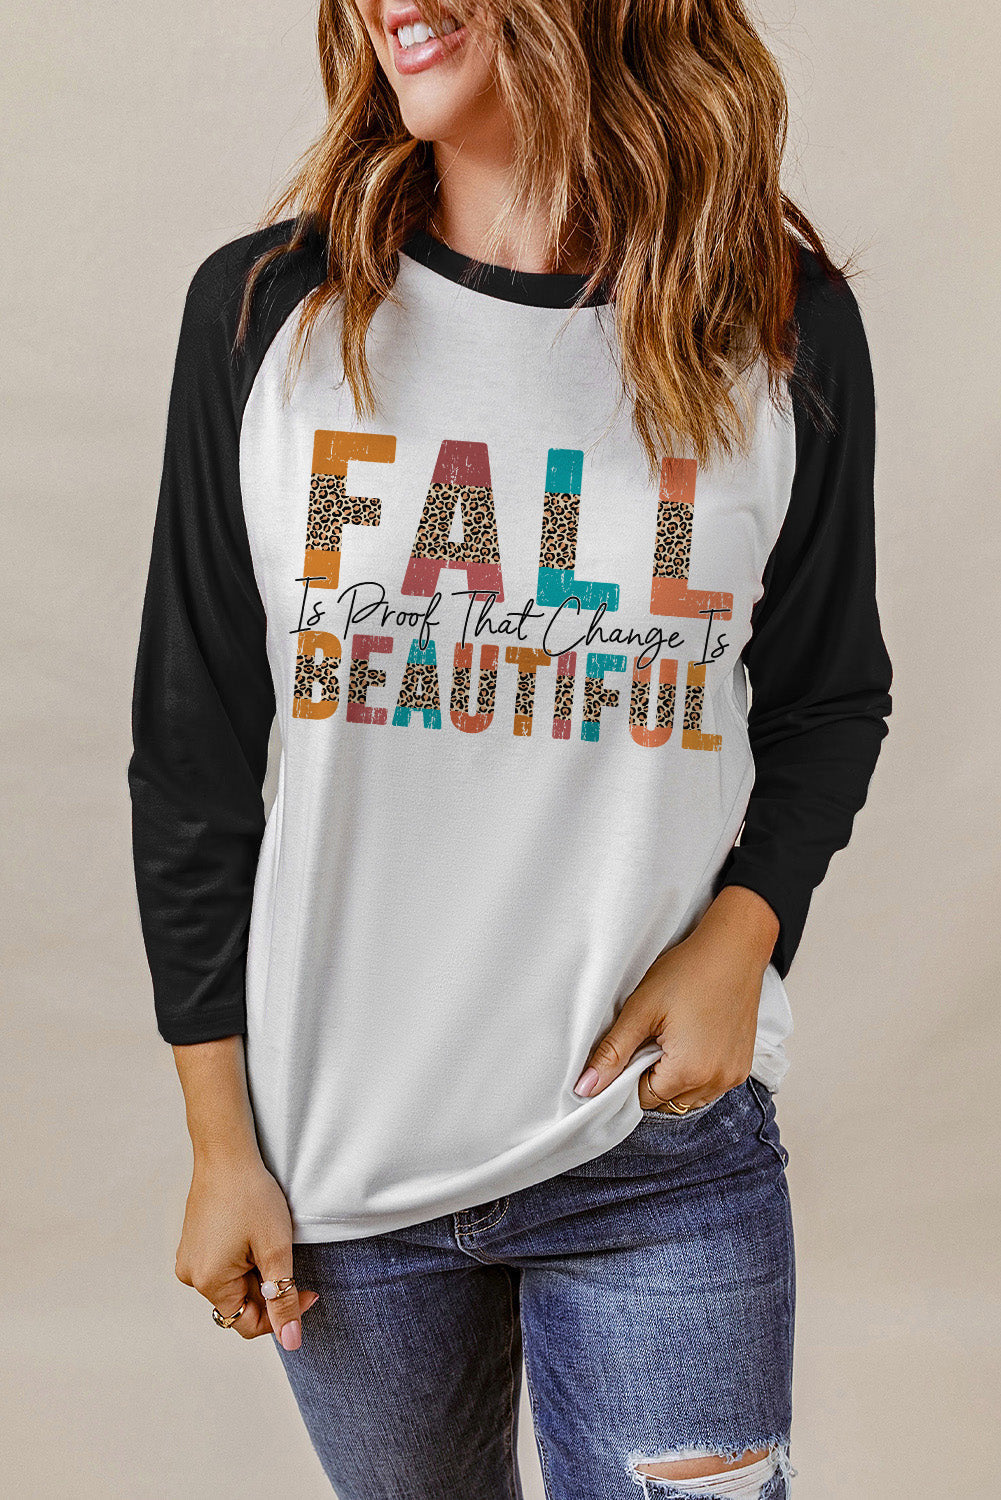 Round Neck Long Sleeve FALL IS PROOF THAT CHANGE IS BEAUTIFUL Graphic Tee The Stout Steer